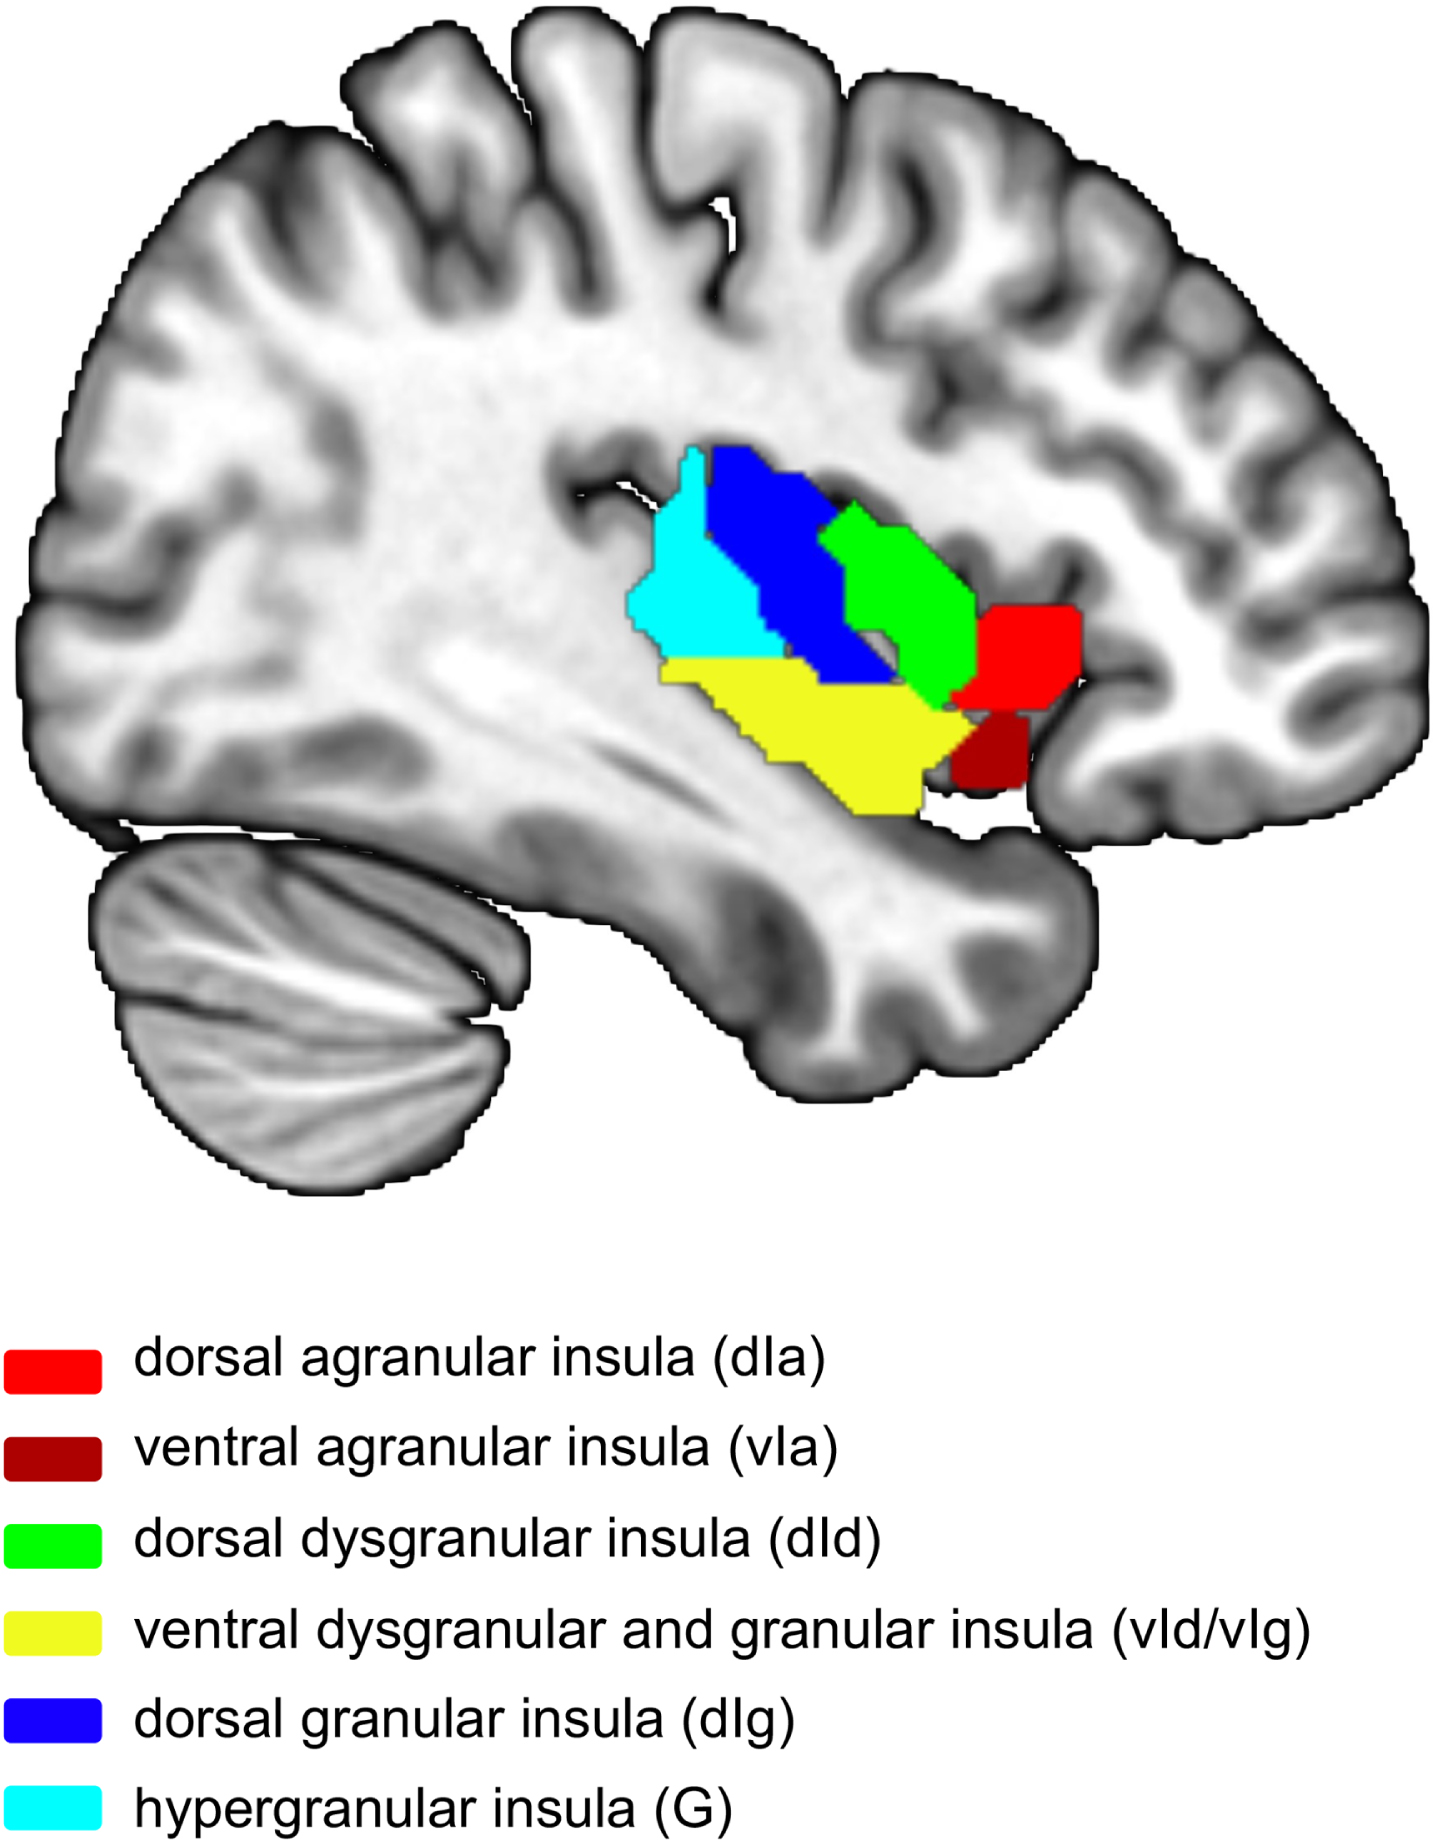 Atlas of insula subregions (left side). ROIs were selected based on the Human Brainnetome Atlas [18], which divided the insula into 6 subregions. Different colors represent different insula subregions. Red, dorsal agranular insula (dIa); dark red, ventral agranular insula (vIa); green, dorsal dysgranular insula; yellow, ventral dysgranular and granular insula (vId/vIg); dark blue, dorsal granular insula (dIg); light blue, hypergranular insula (G).